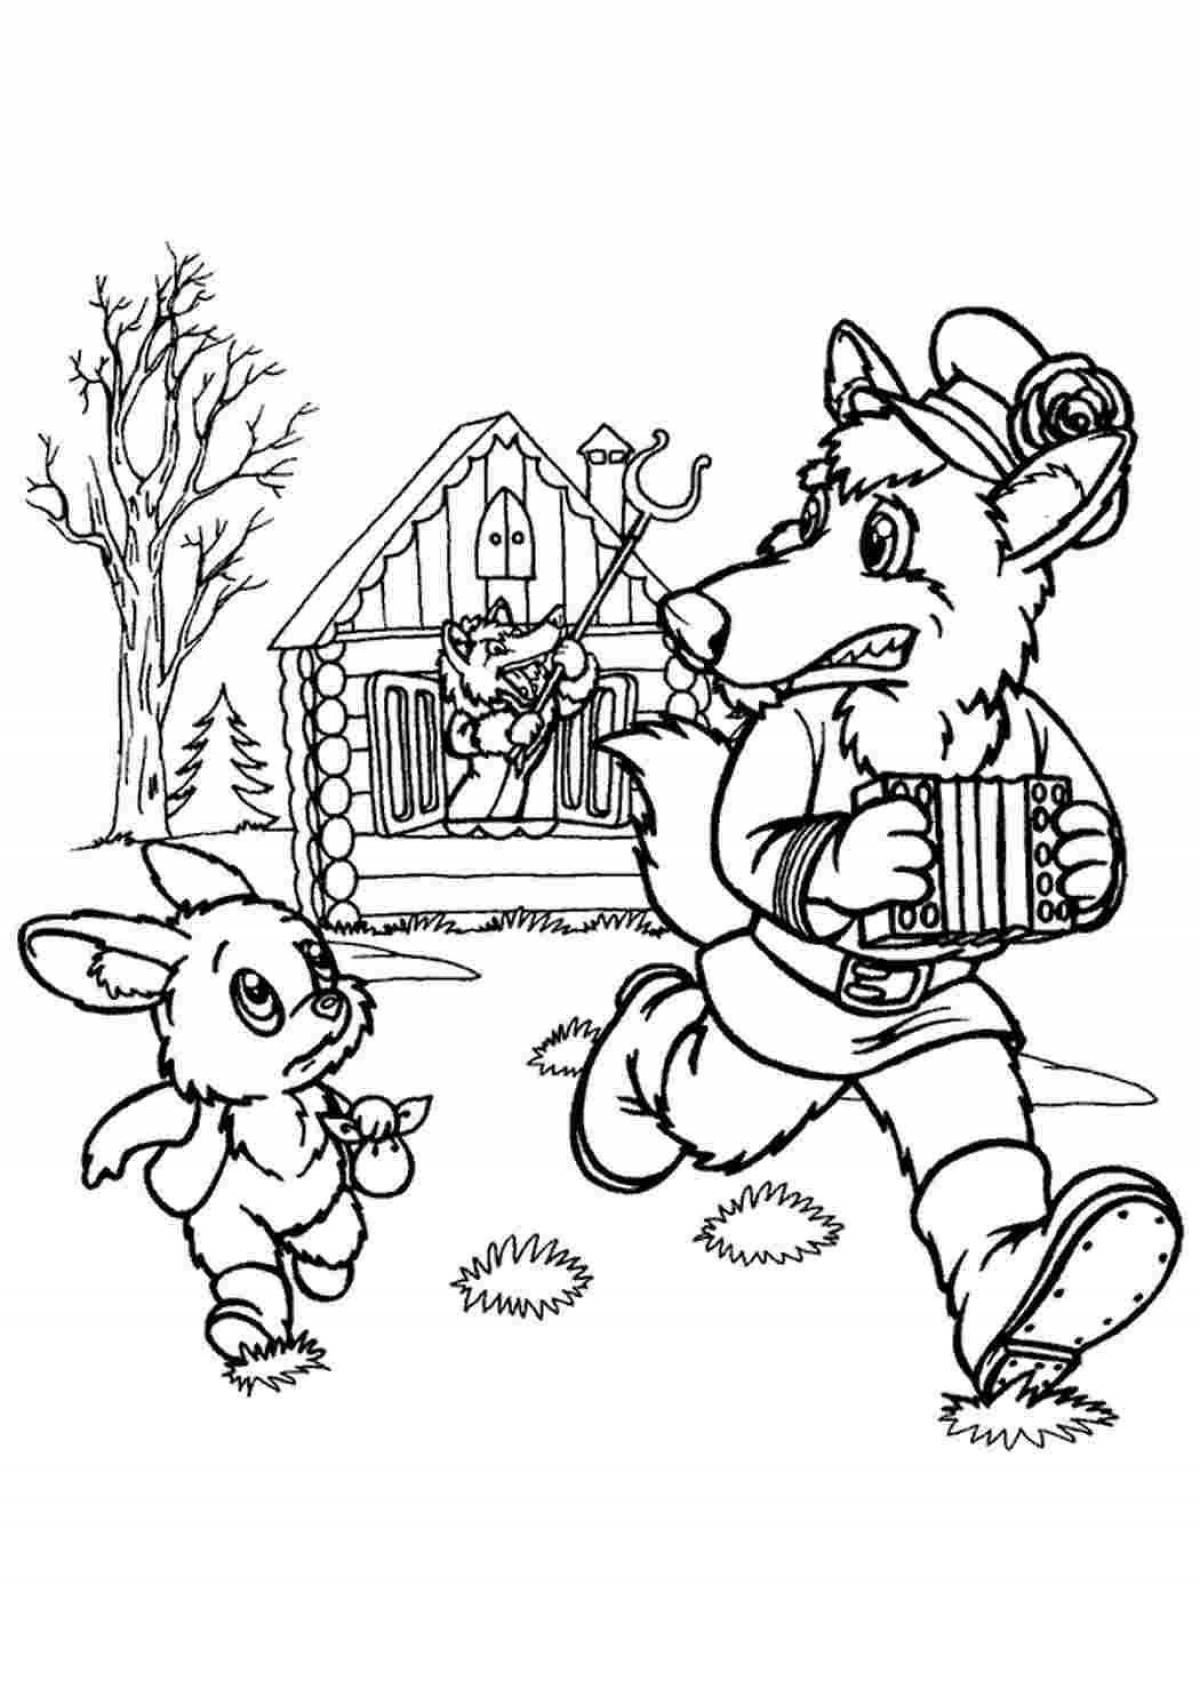 Playful hare hut coloring page